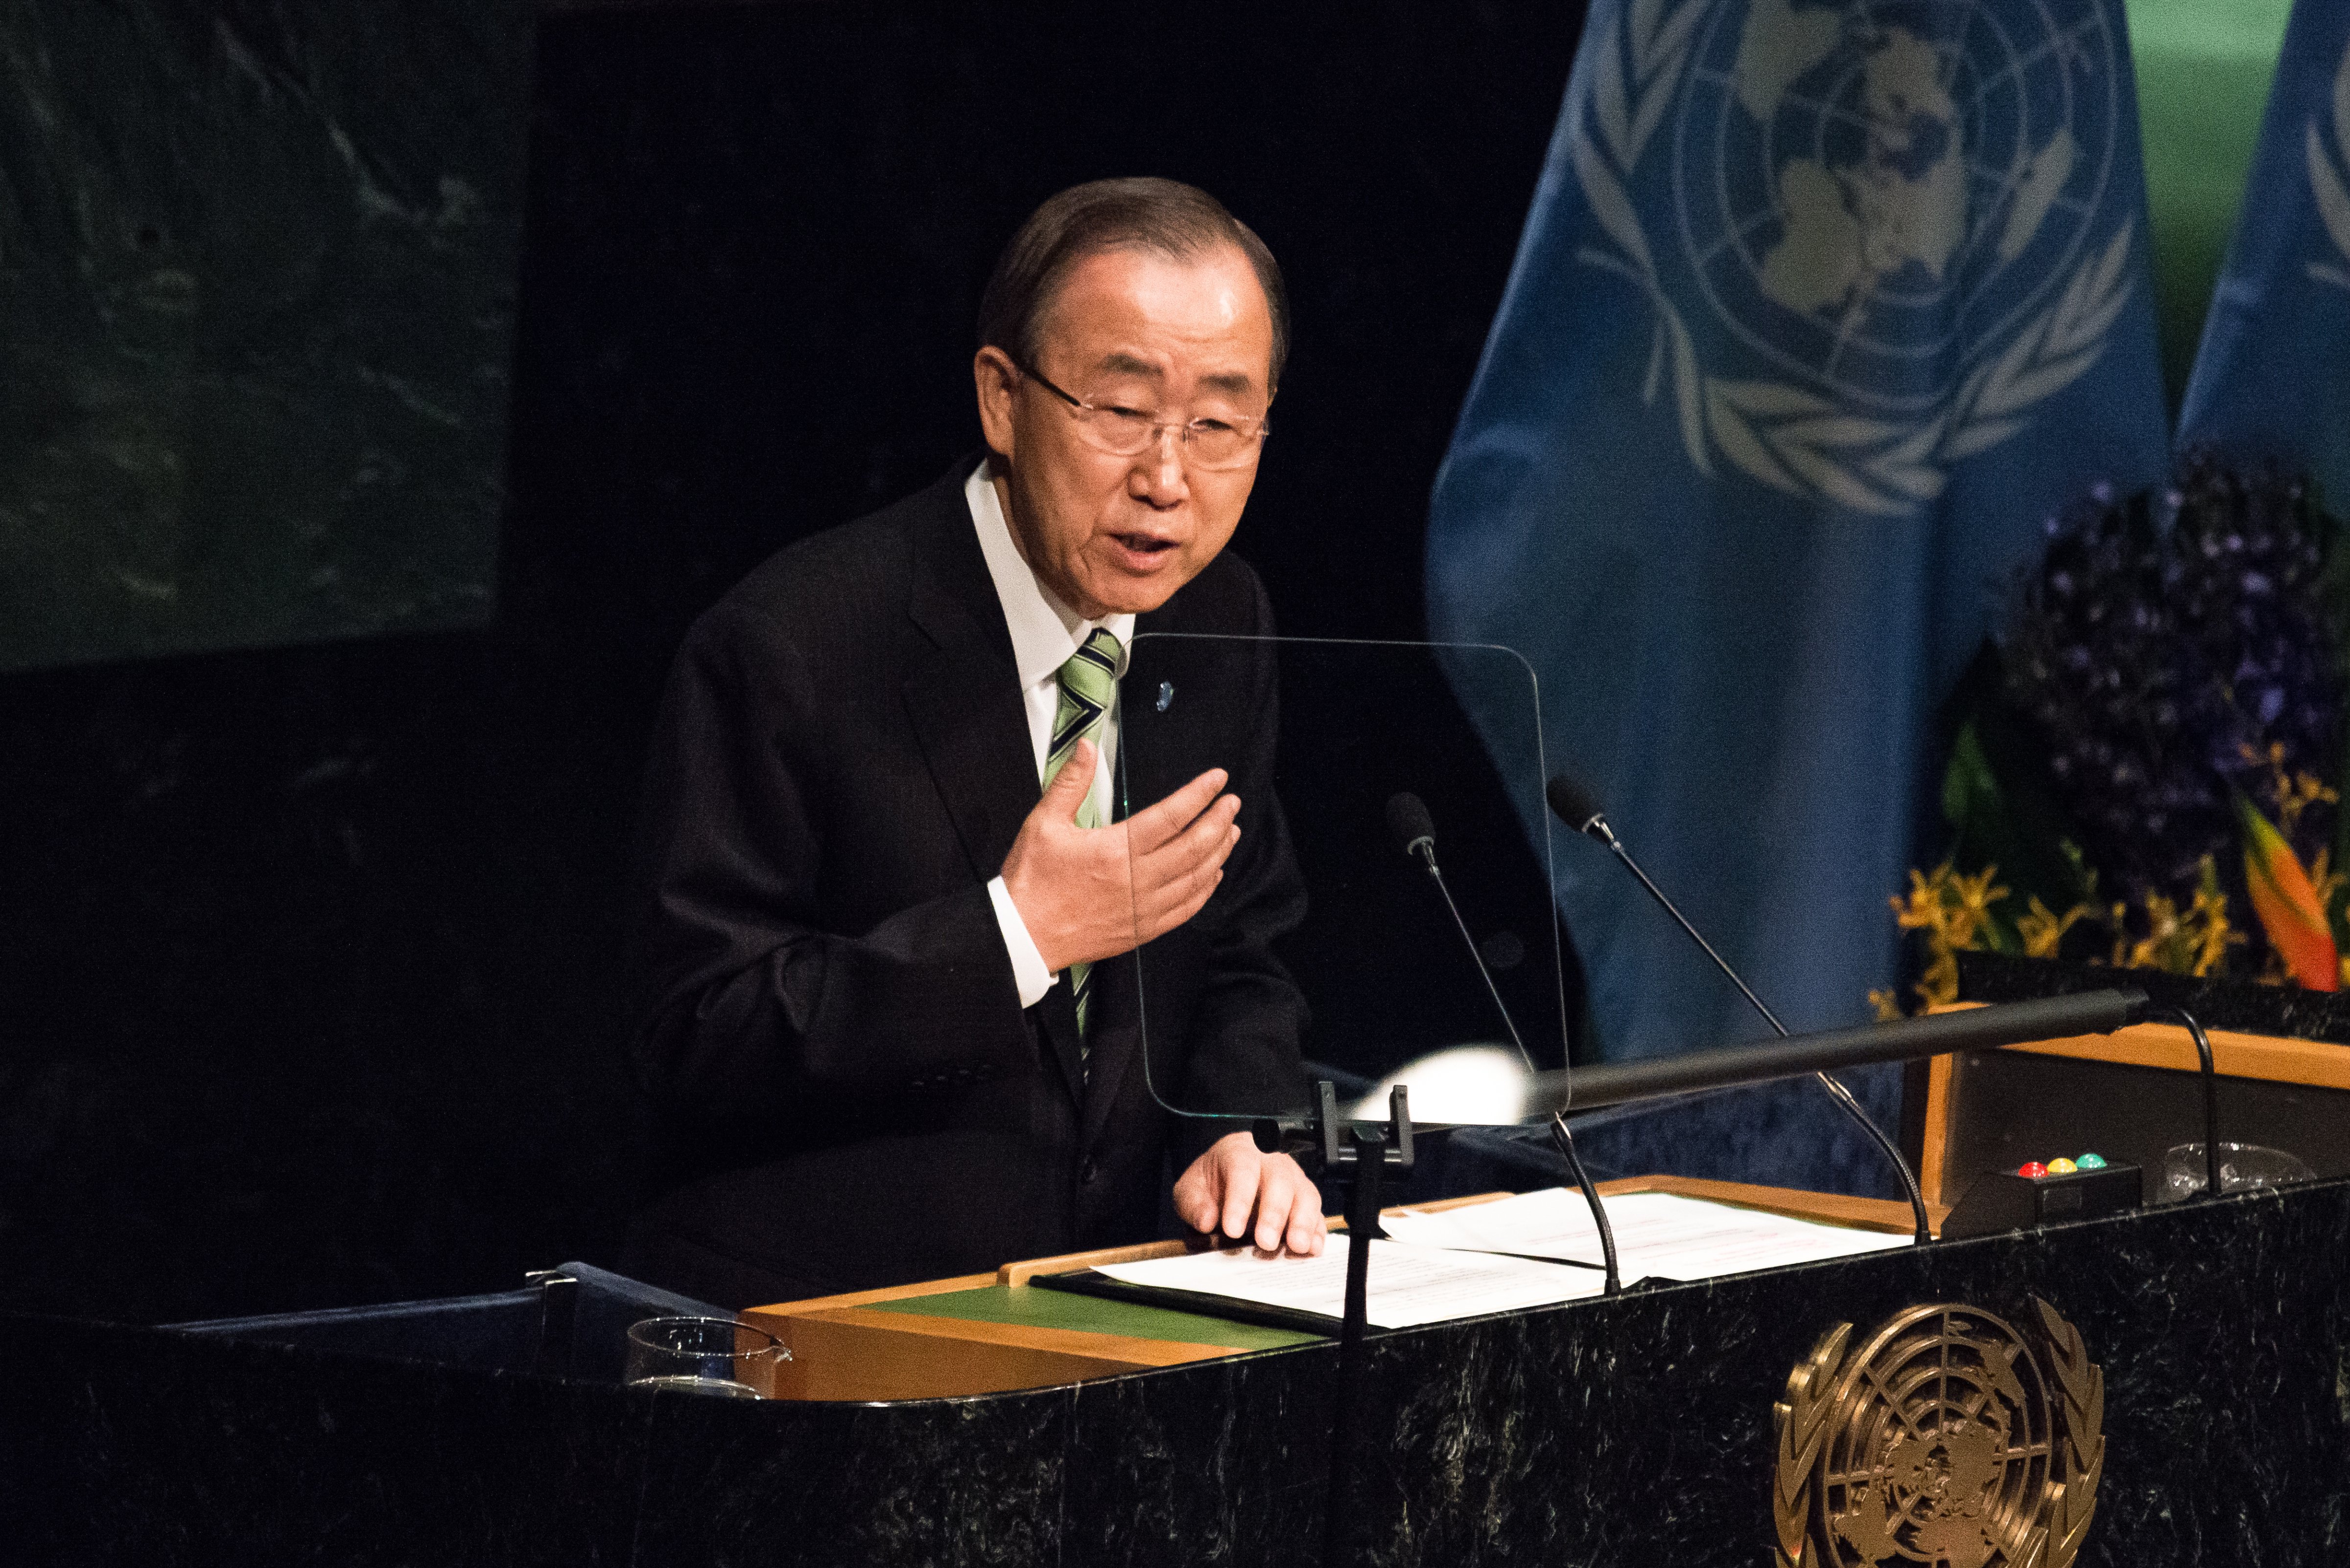 UN Secretary-General Ban Ki-moon offers his opening remarks as leaders from around the world gathered in General Assembly Hall at UN Headquarters in New York City to sign the Global Climate Agreement resulting from the COP21 conference in Paris last year. (Pacific Press/Getty Images)